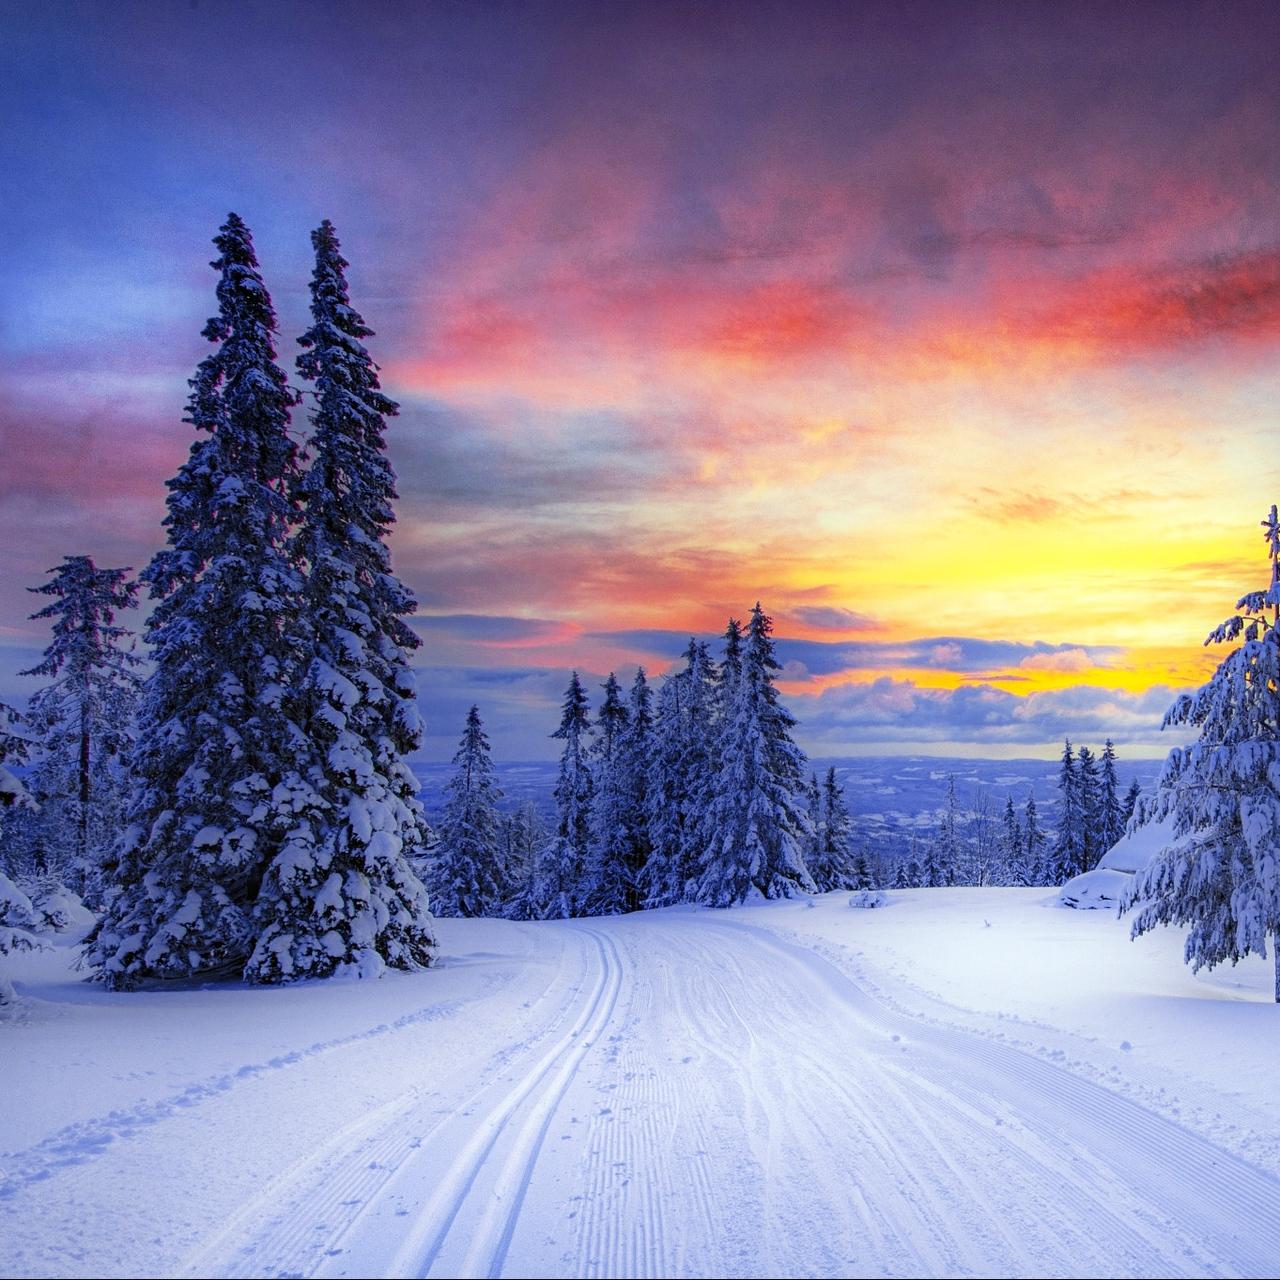 Download wallpaper 1280x1280 norway, winter, forest, snow